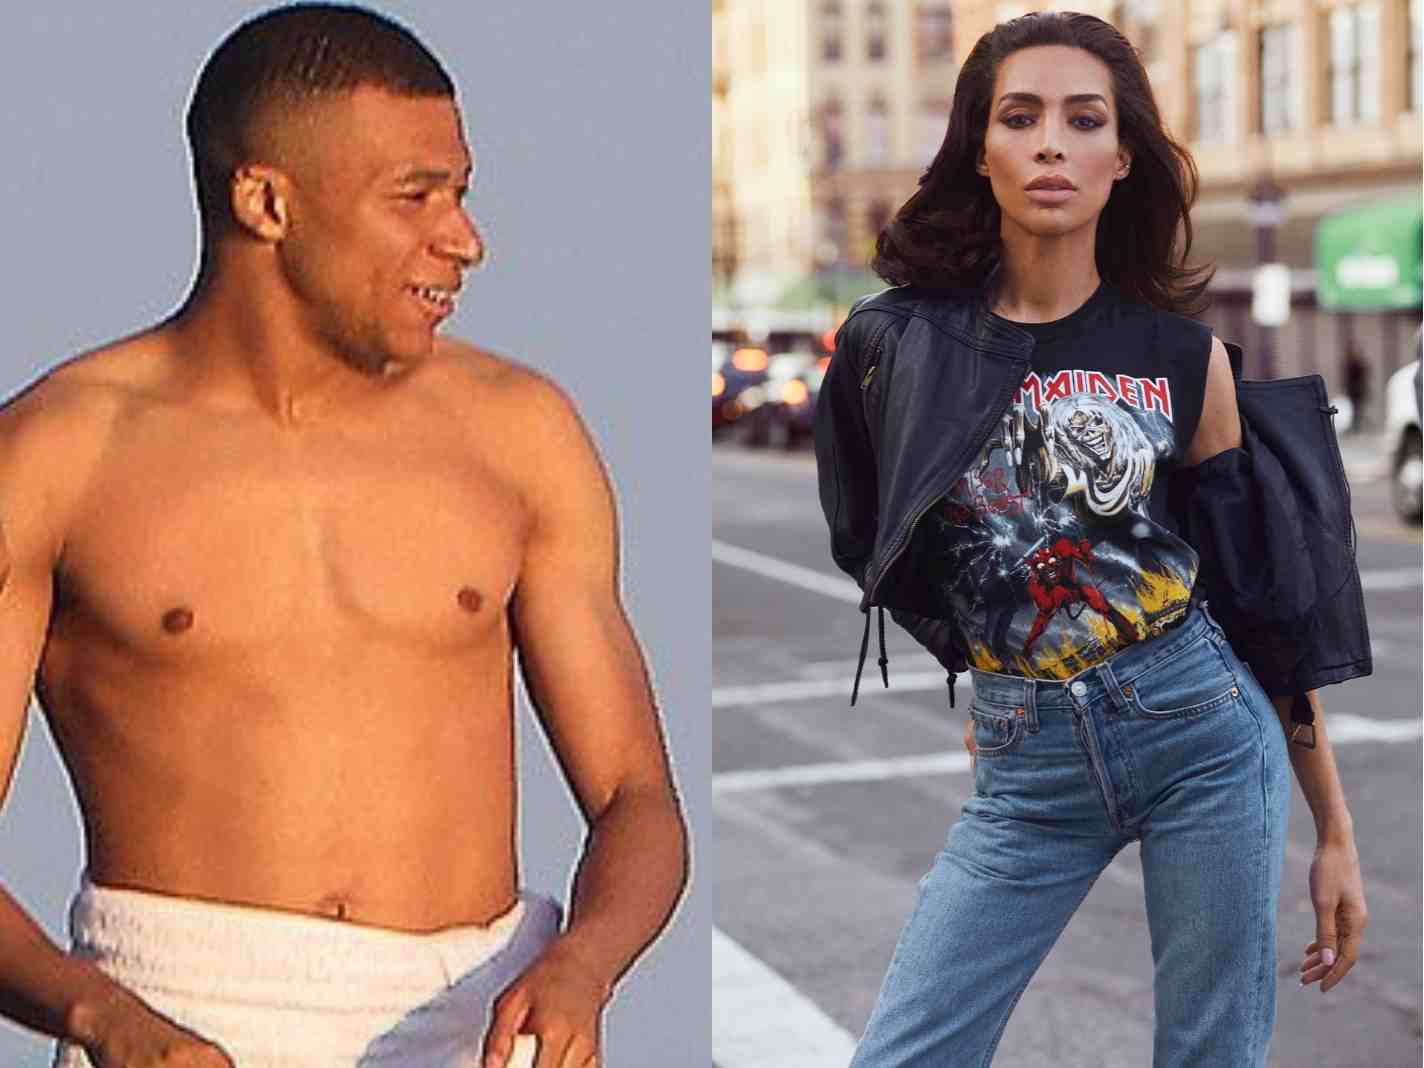 Is Kylian Mbappe Dating Trans Model Ines Rau? Here’s What We Know